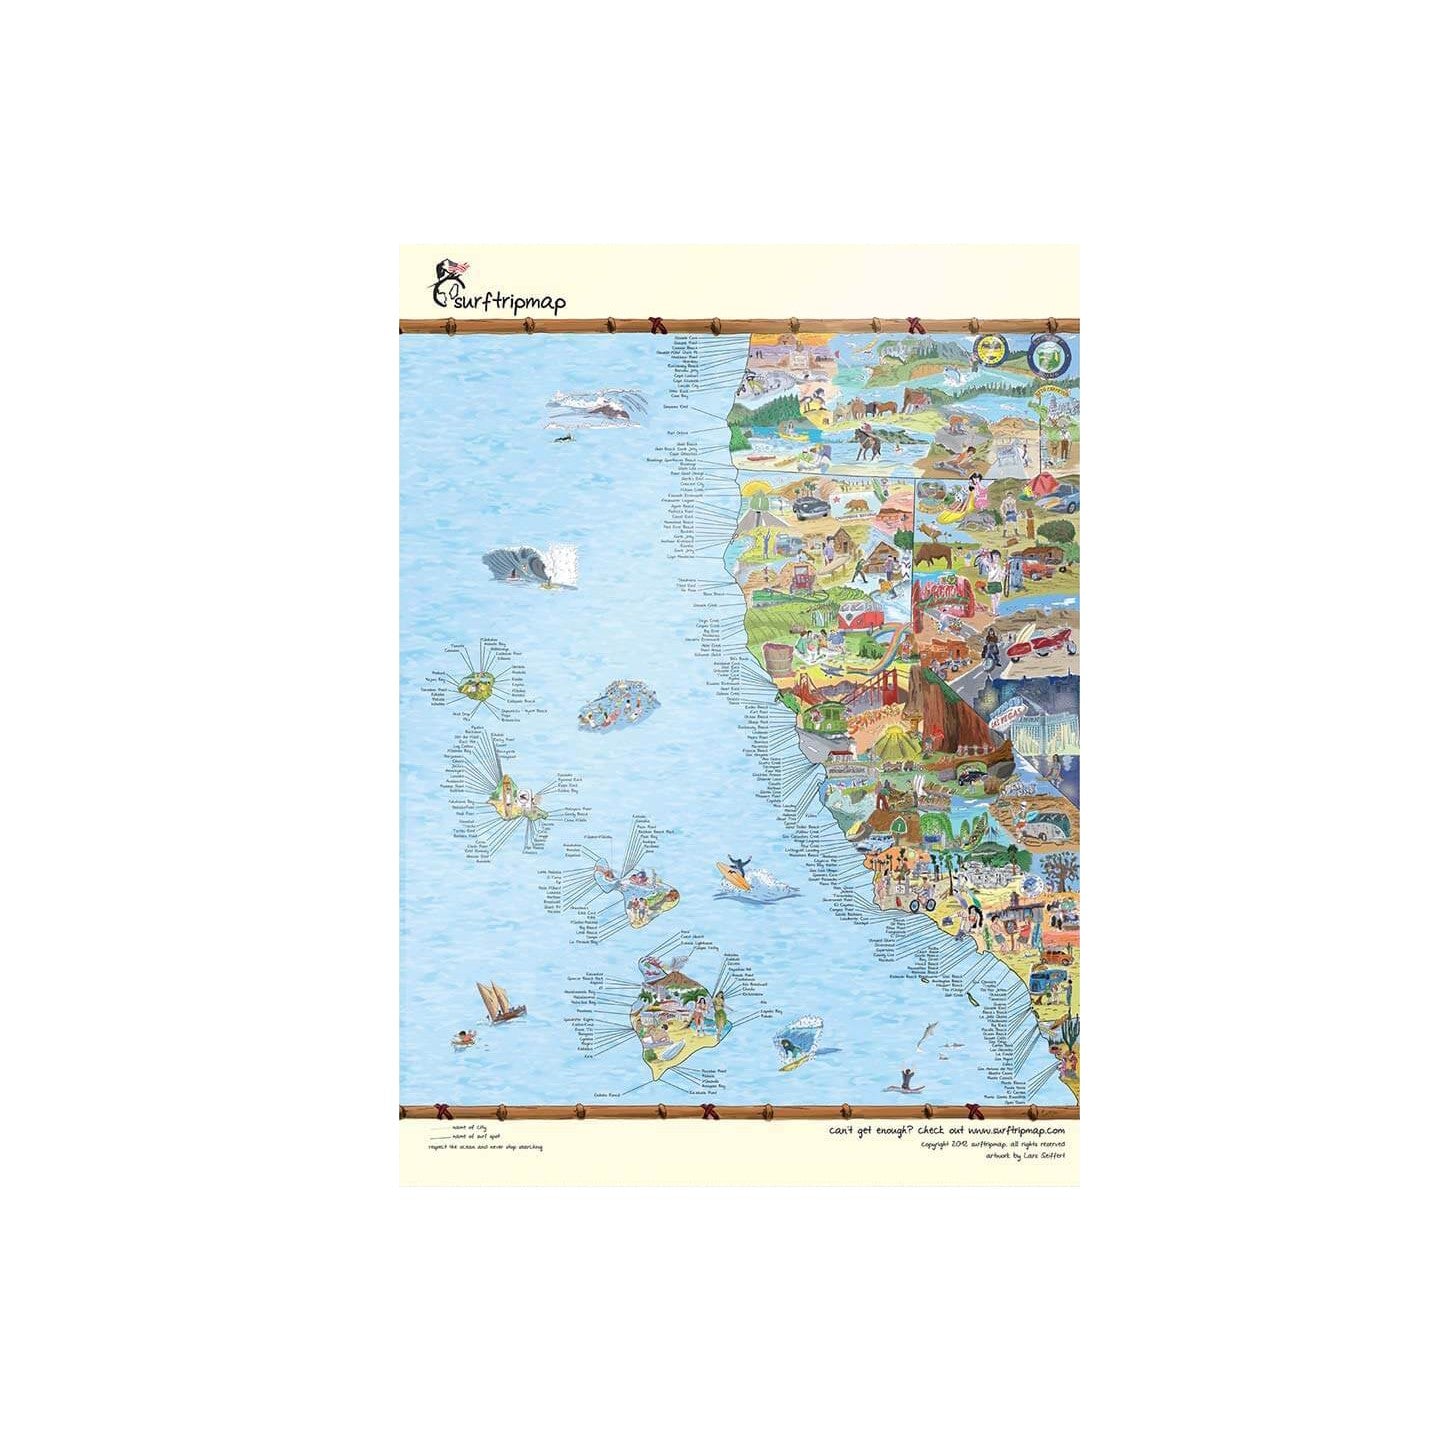 Awesome Maps - Poster West Coast USA Surf Spots Map